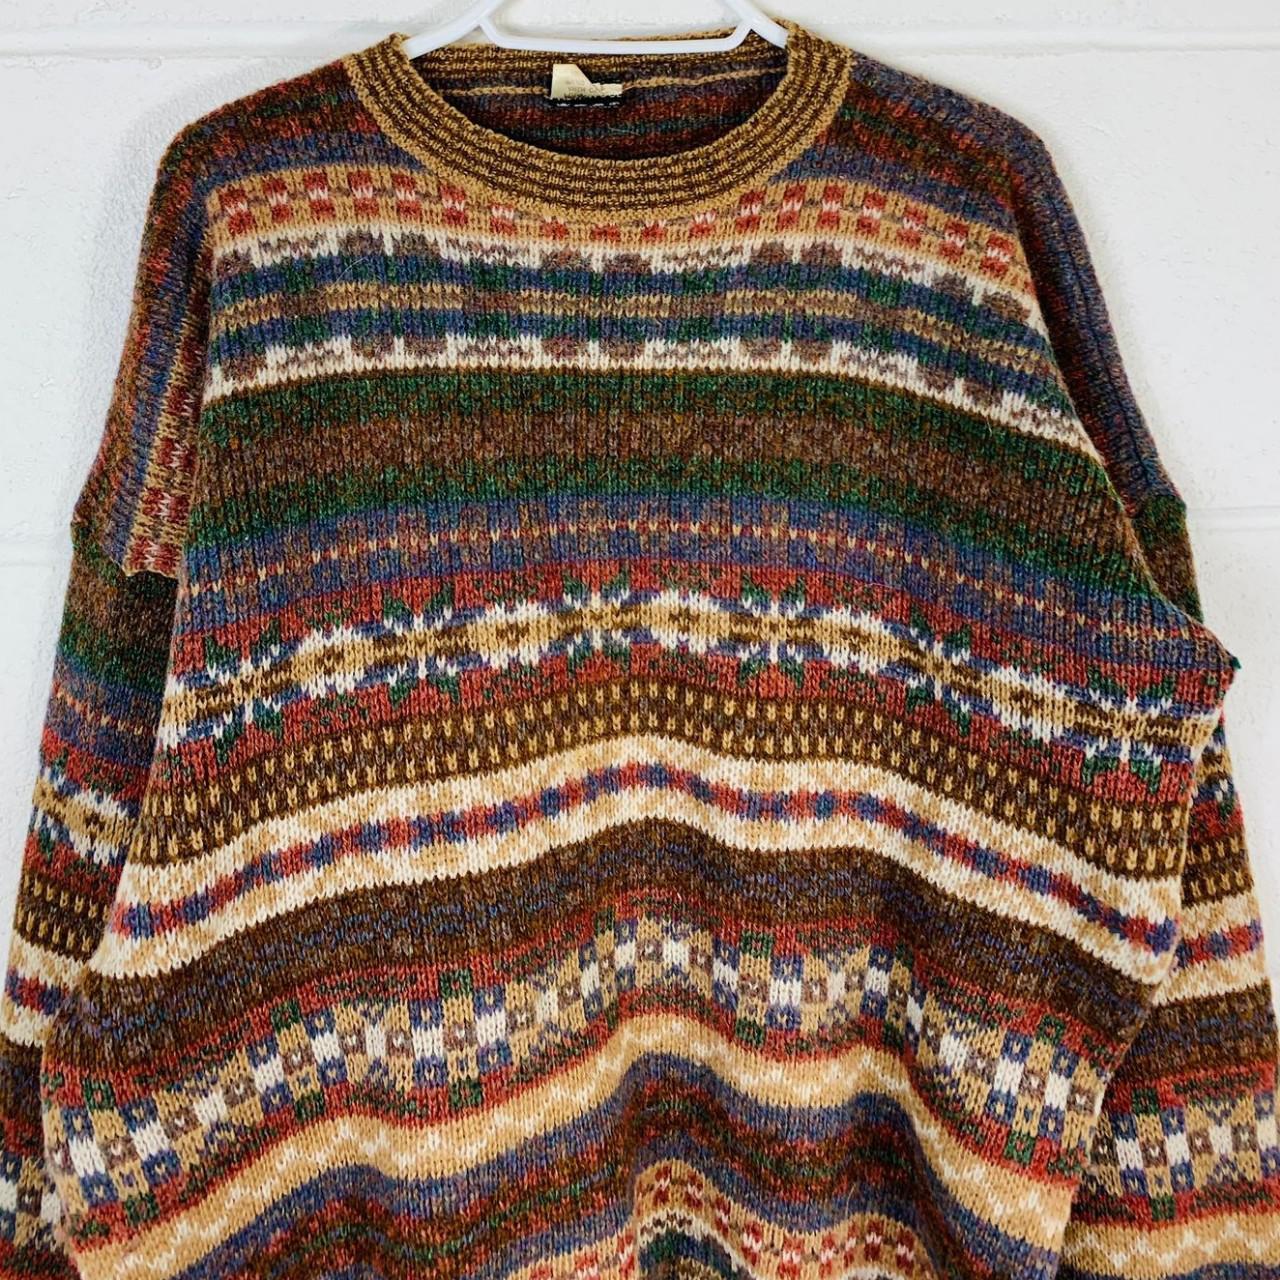 Product Image 1 - Vintage abstract knitted jumper

Brown and